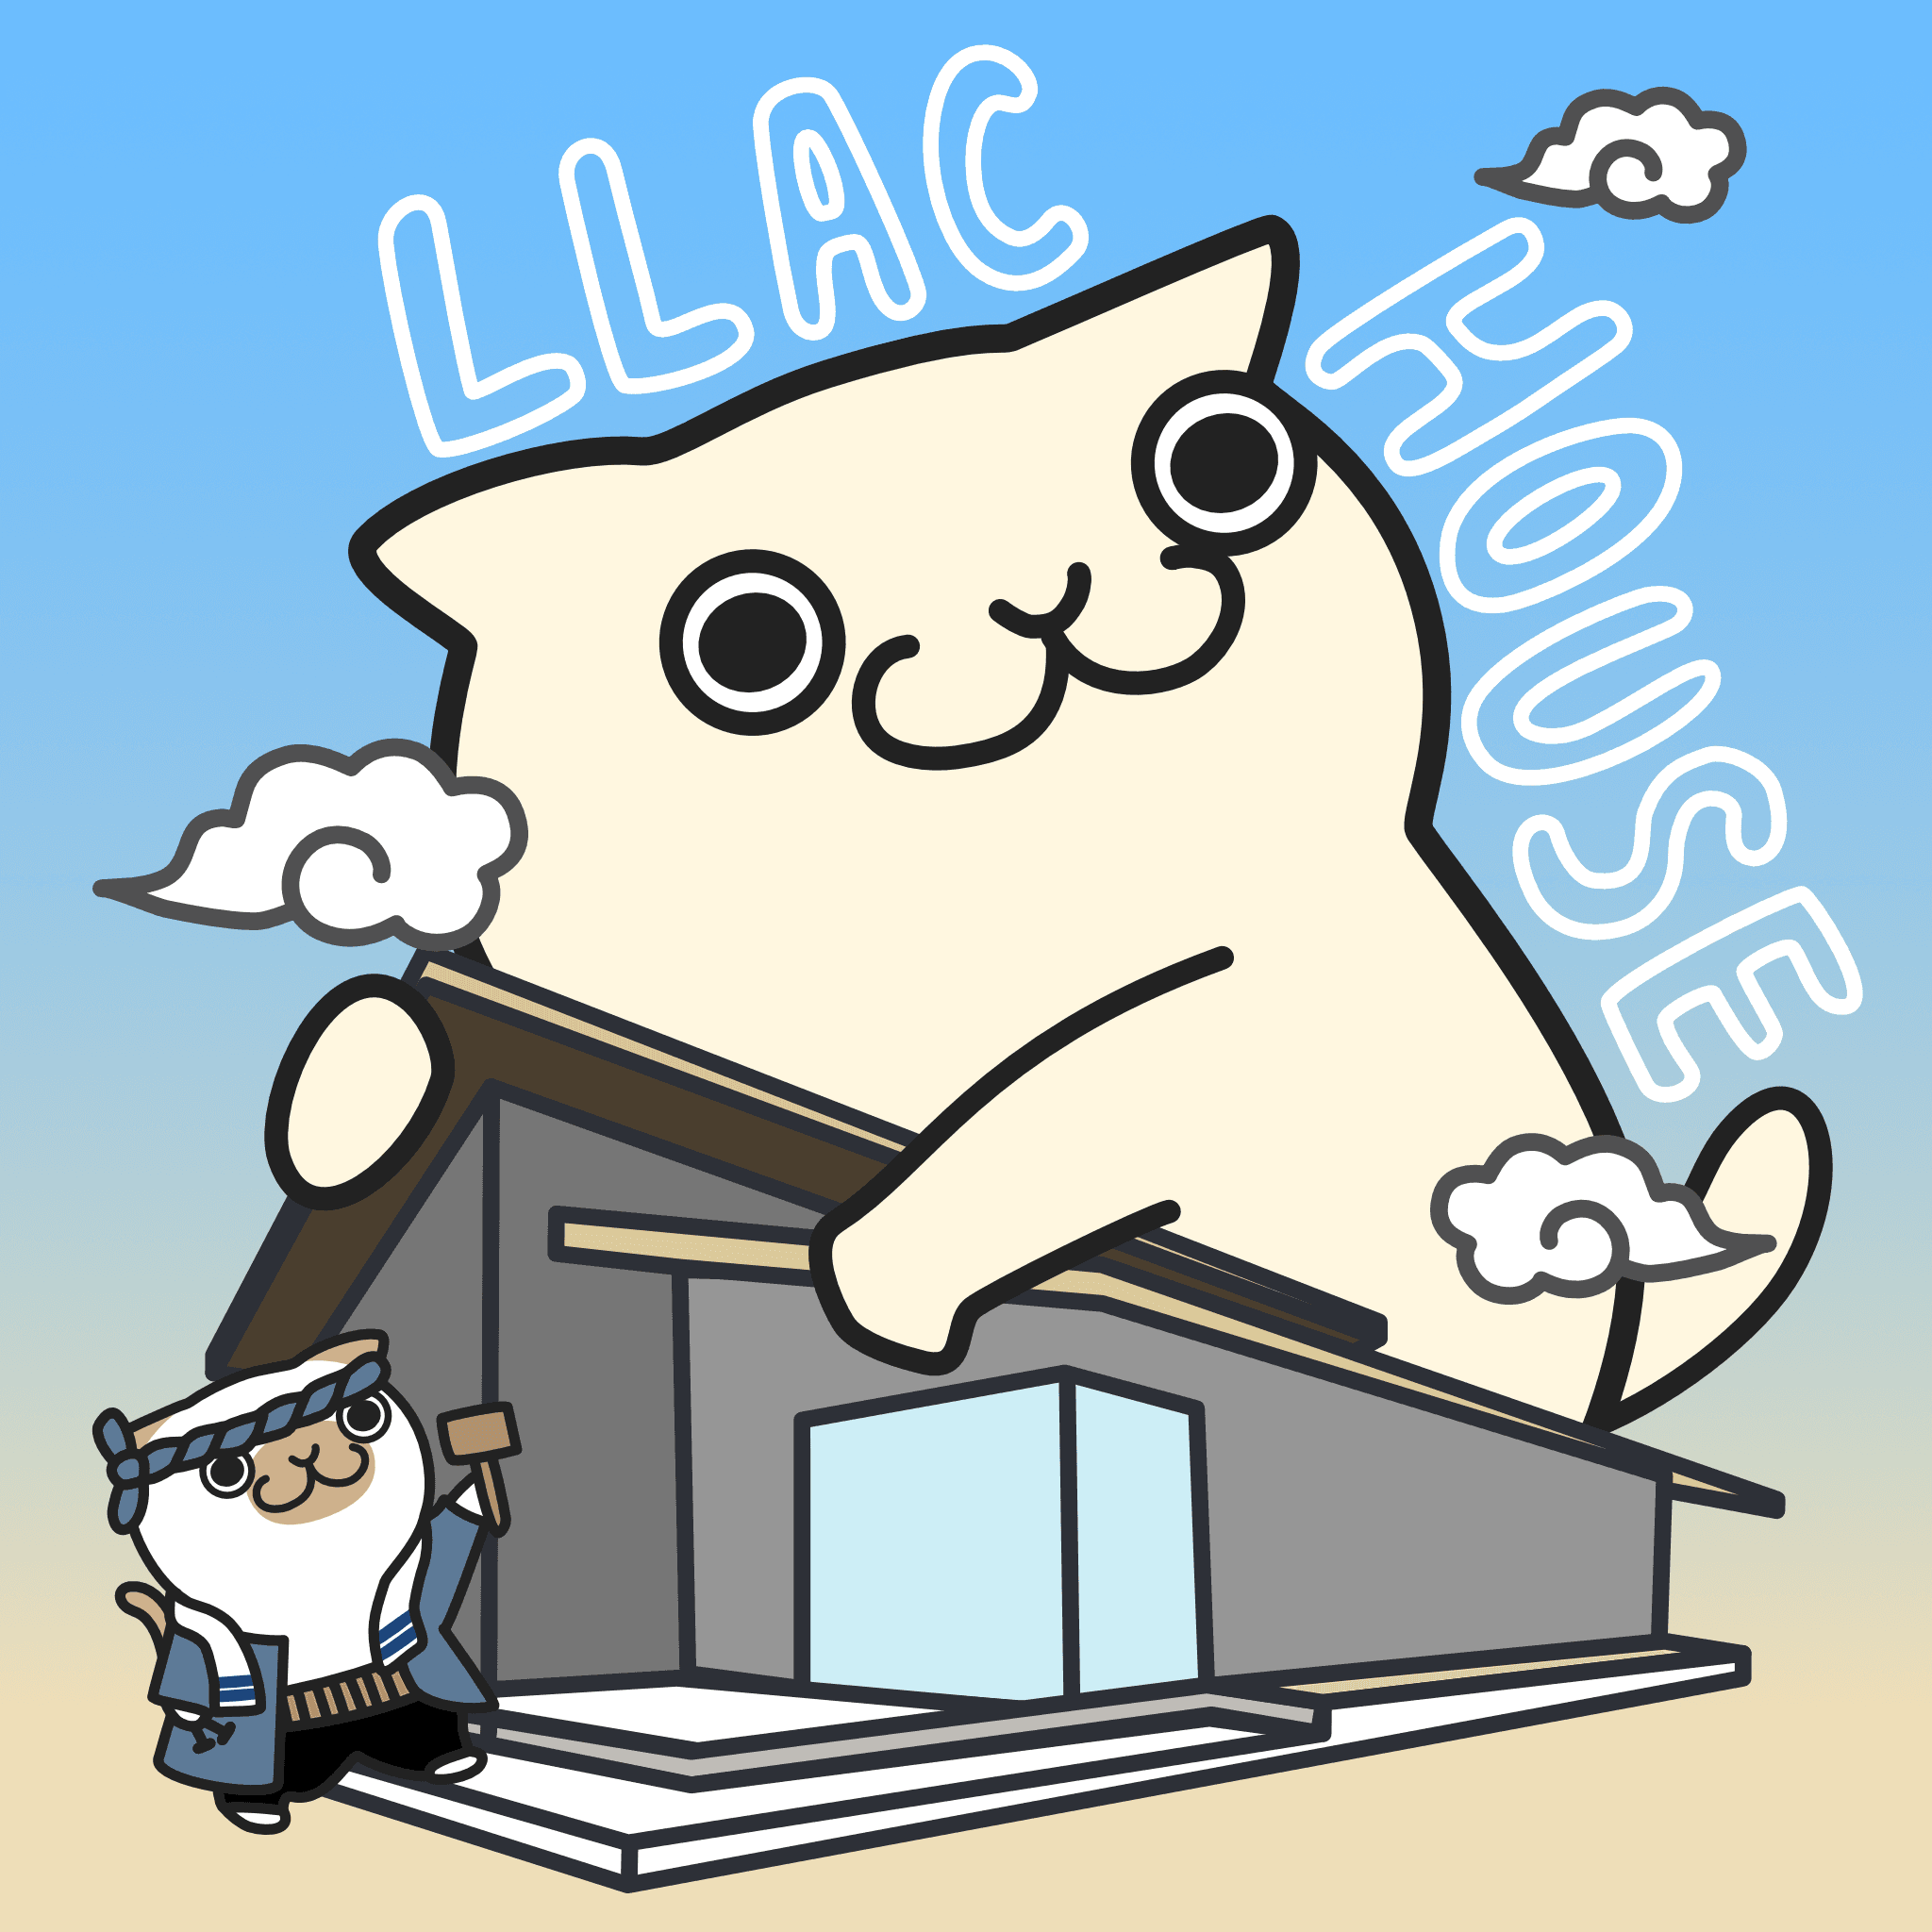 LLAC House Crowdfunding SBT